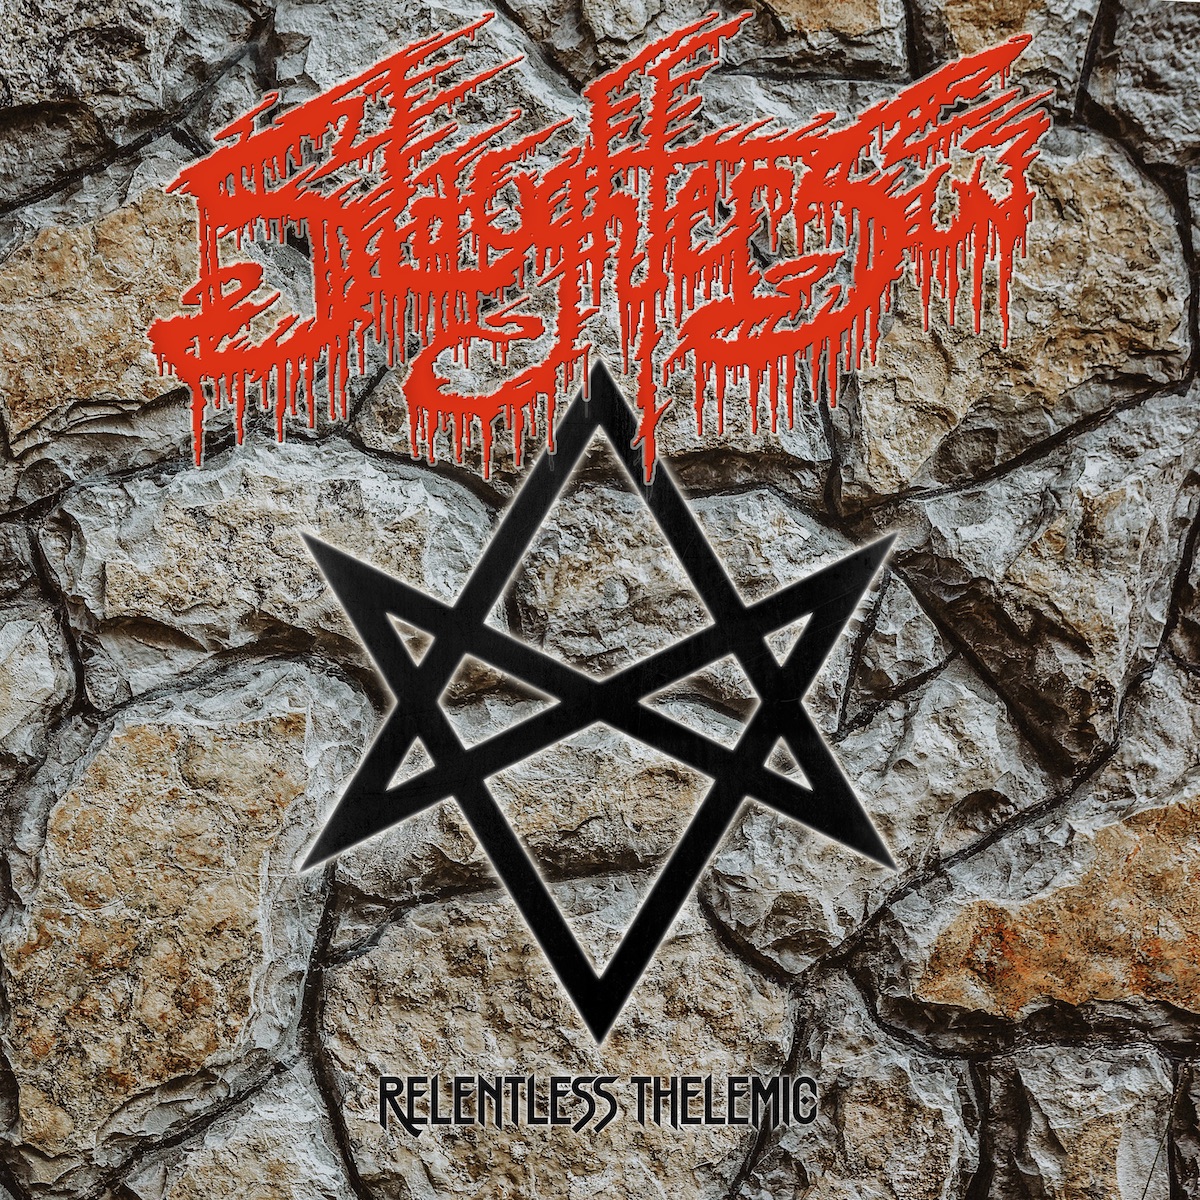 LISTEN: “Relentless Thelemic” by Slaughtersun